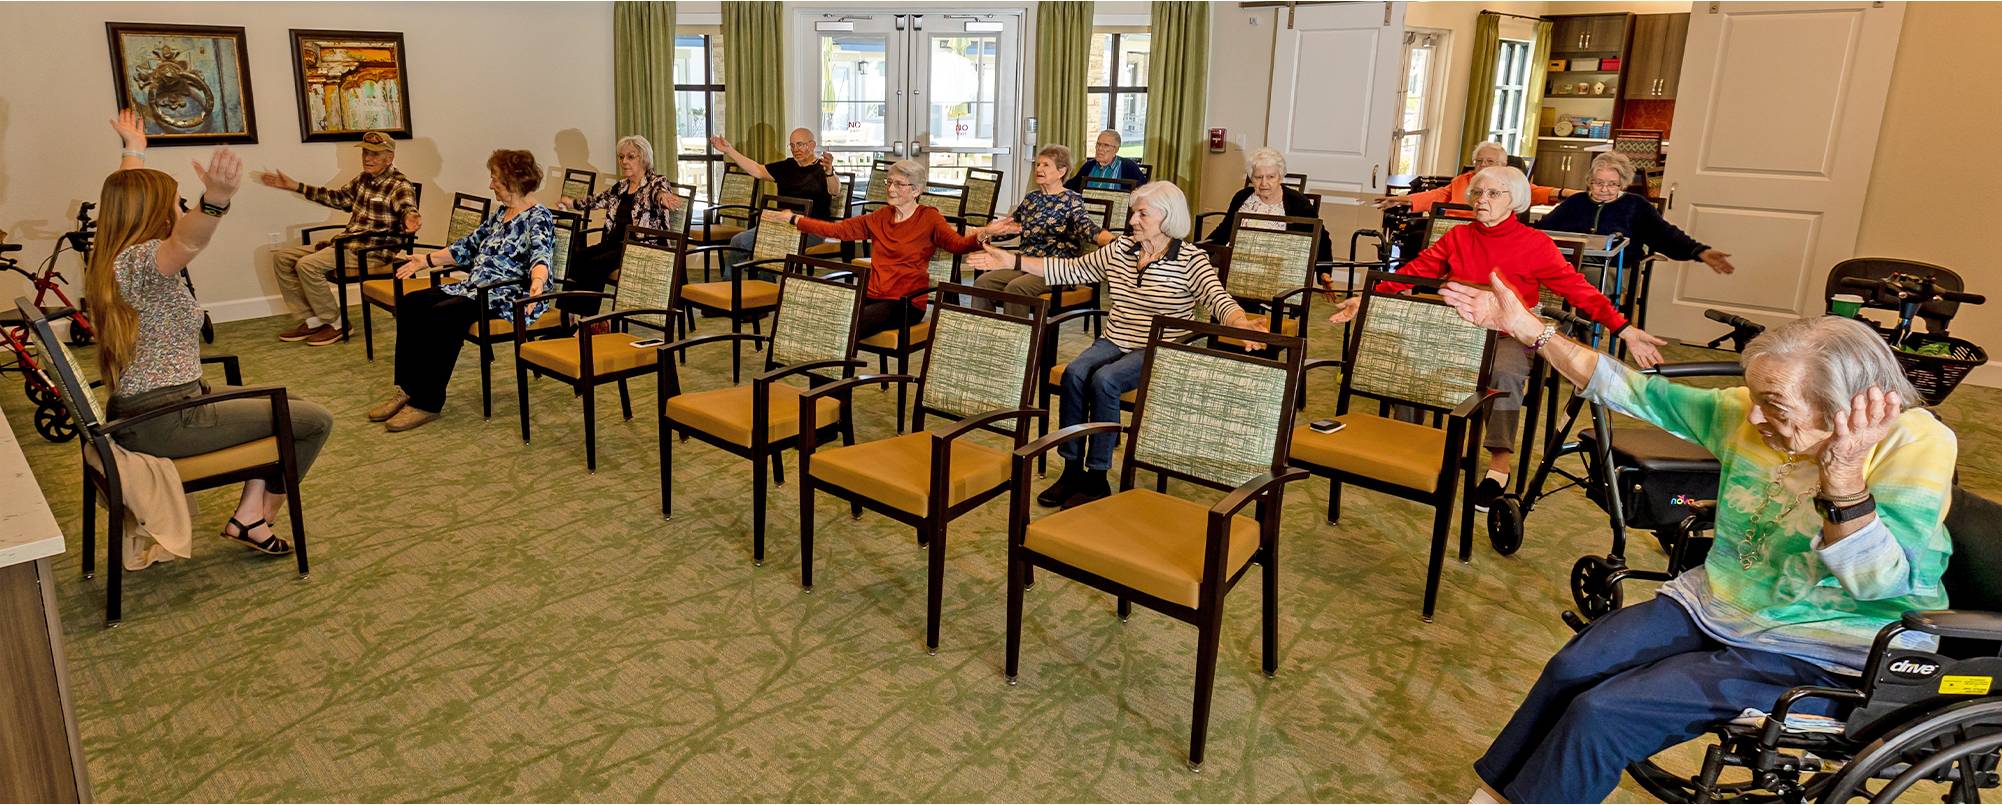 A group of people sitting in chairs with one person standing up.